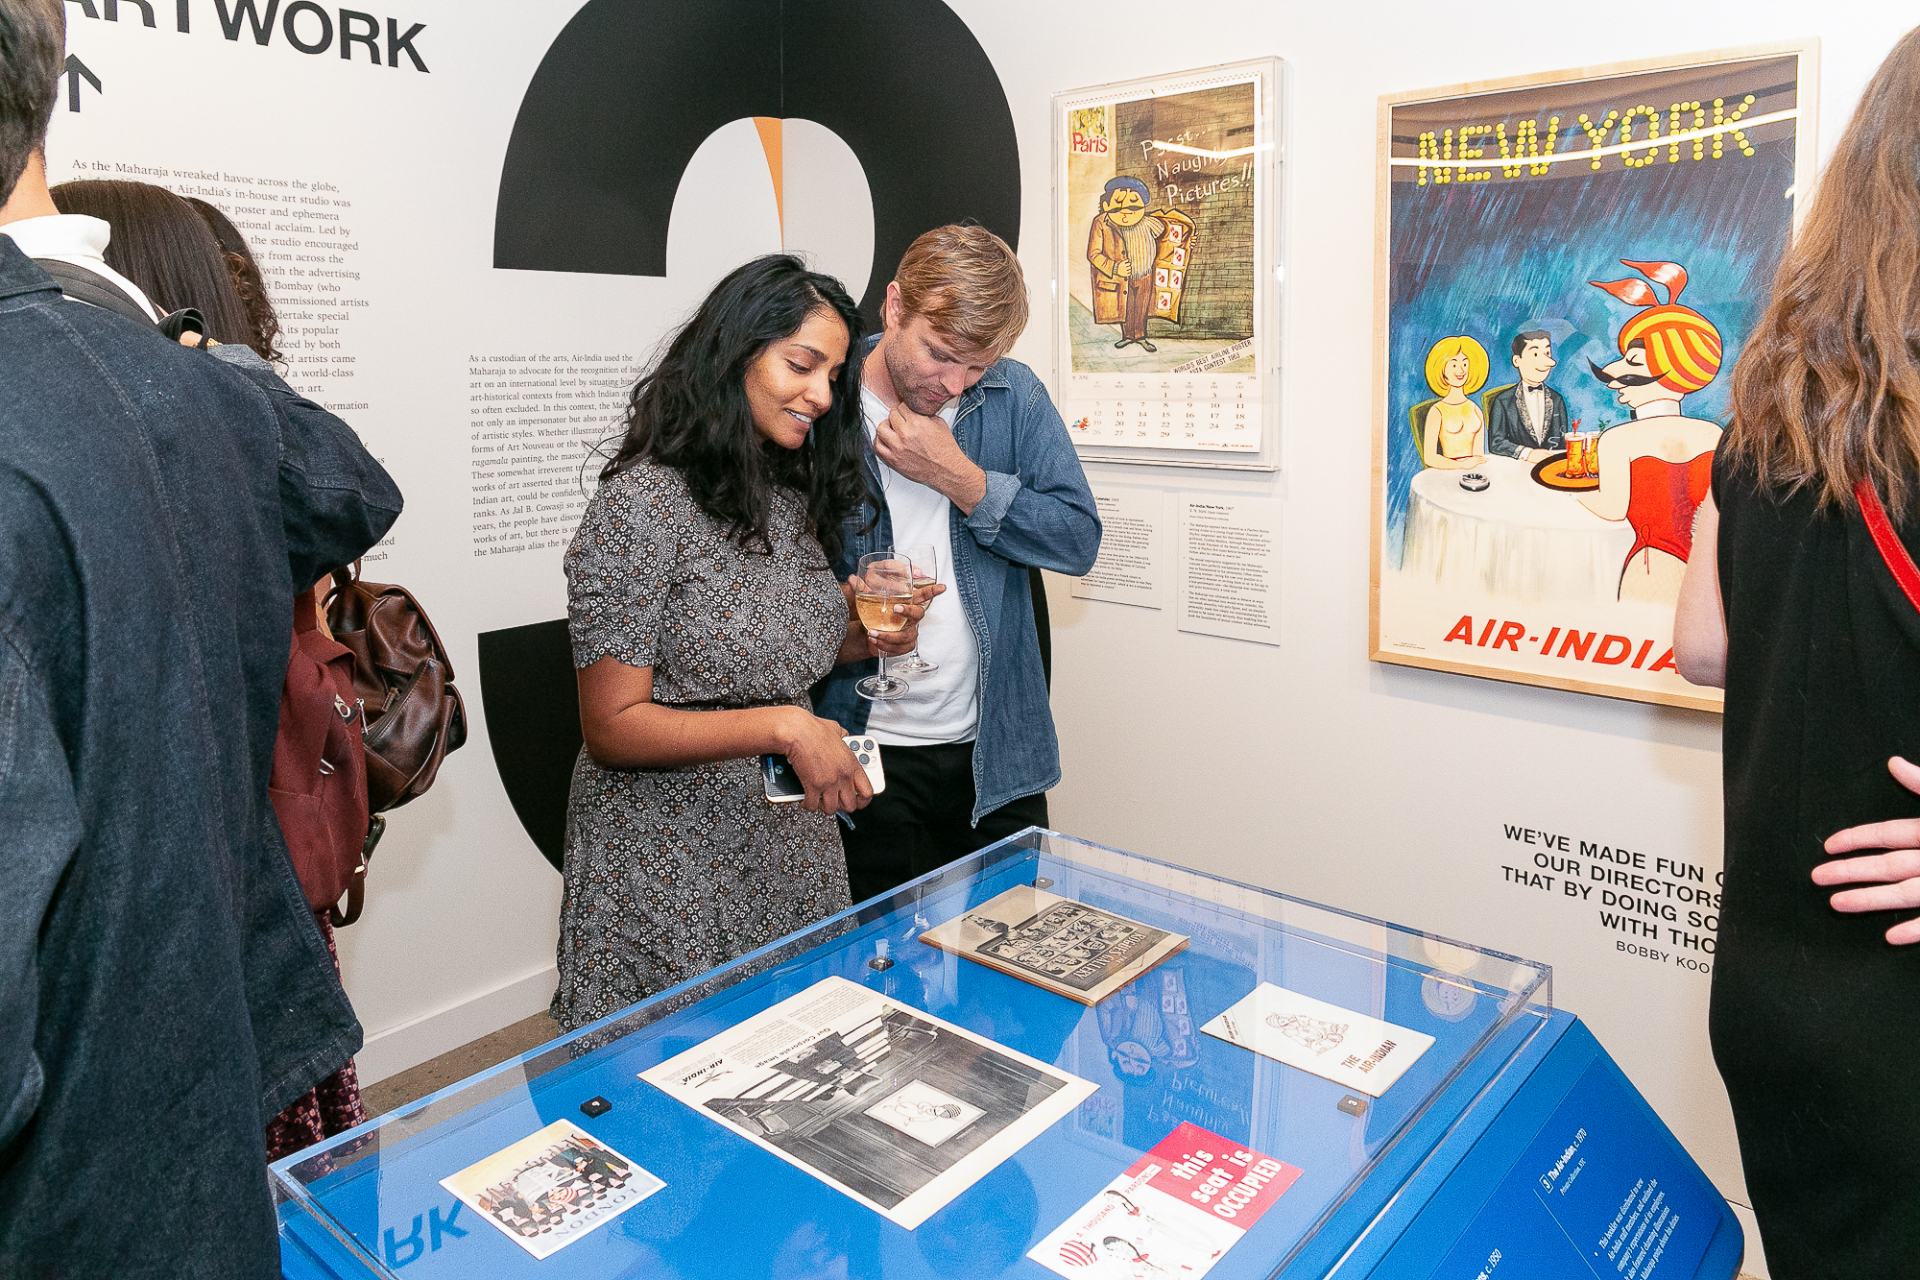 A couple looking at Air-India ephemera in a glass case at a museum gallery.